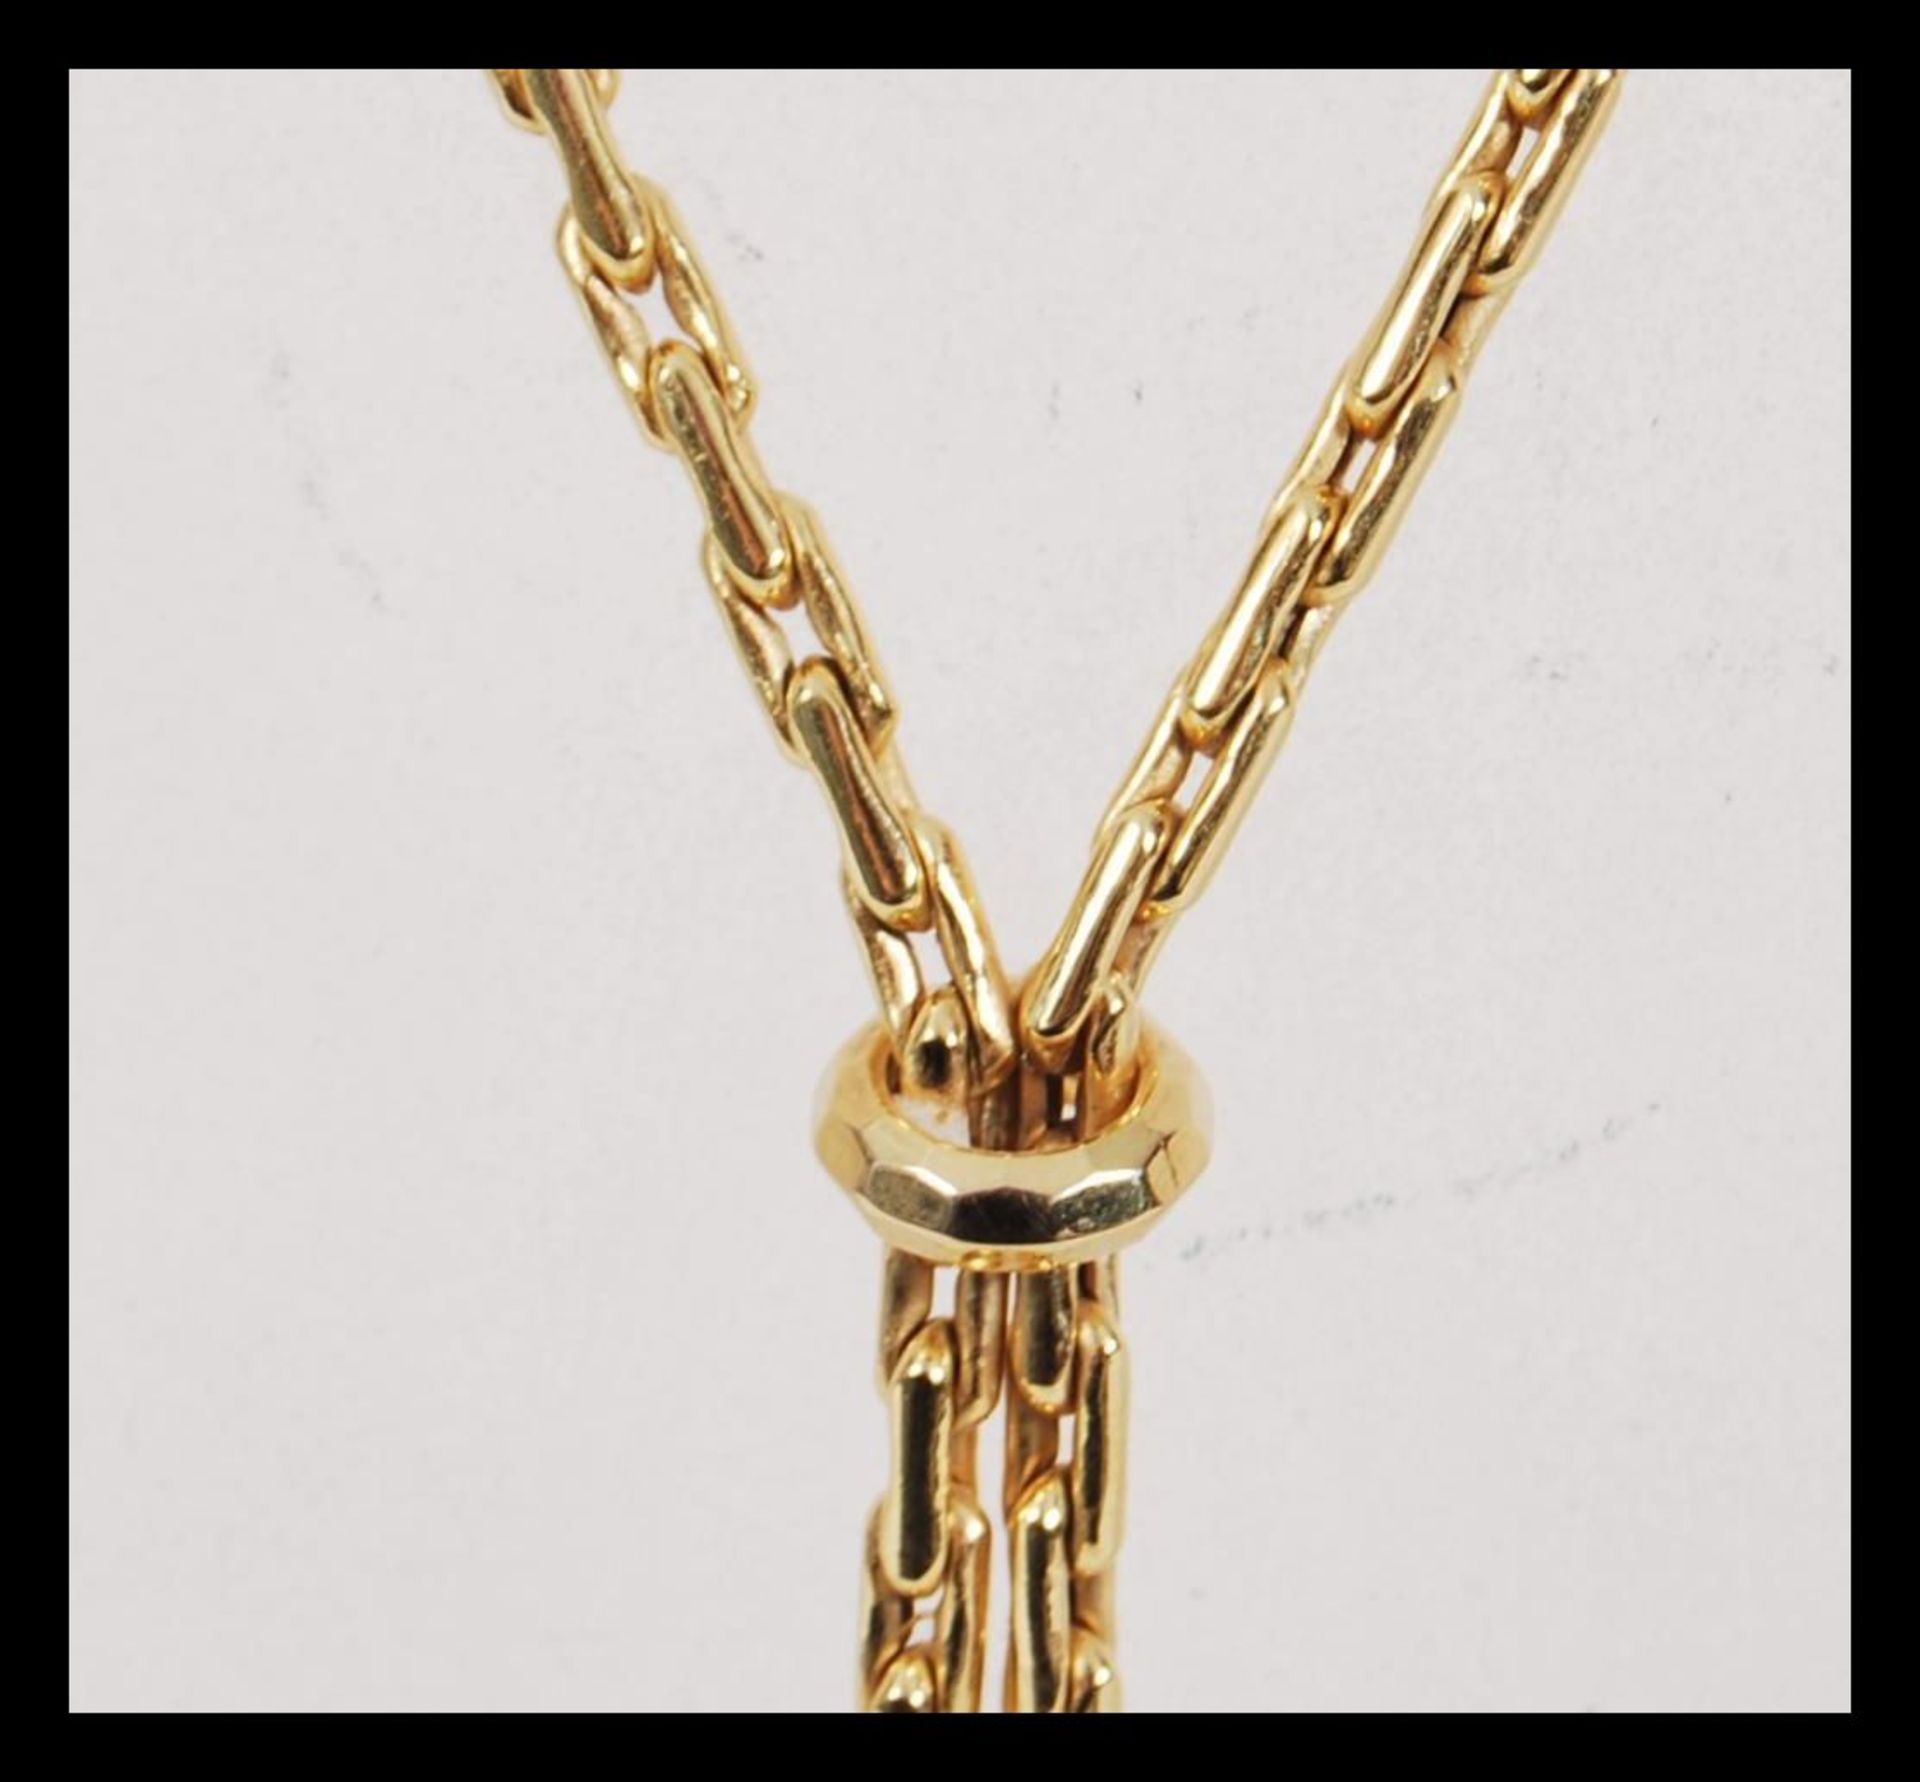 A hallmarked 9ct gold long boxlink necklace chain, having a large bolt ring clasp, with tasseled - Image 3 of 4